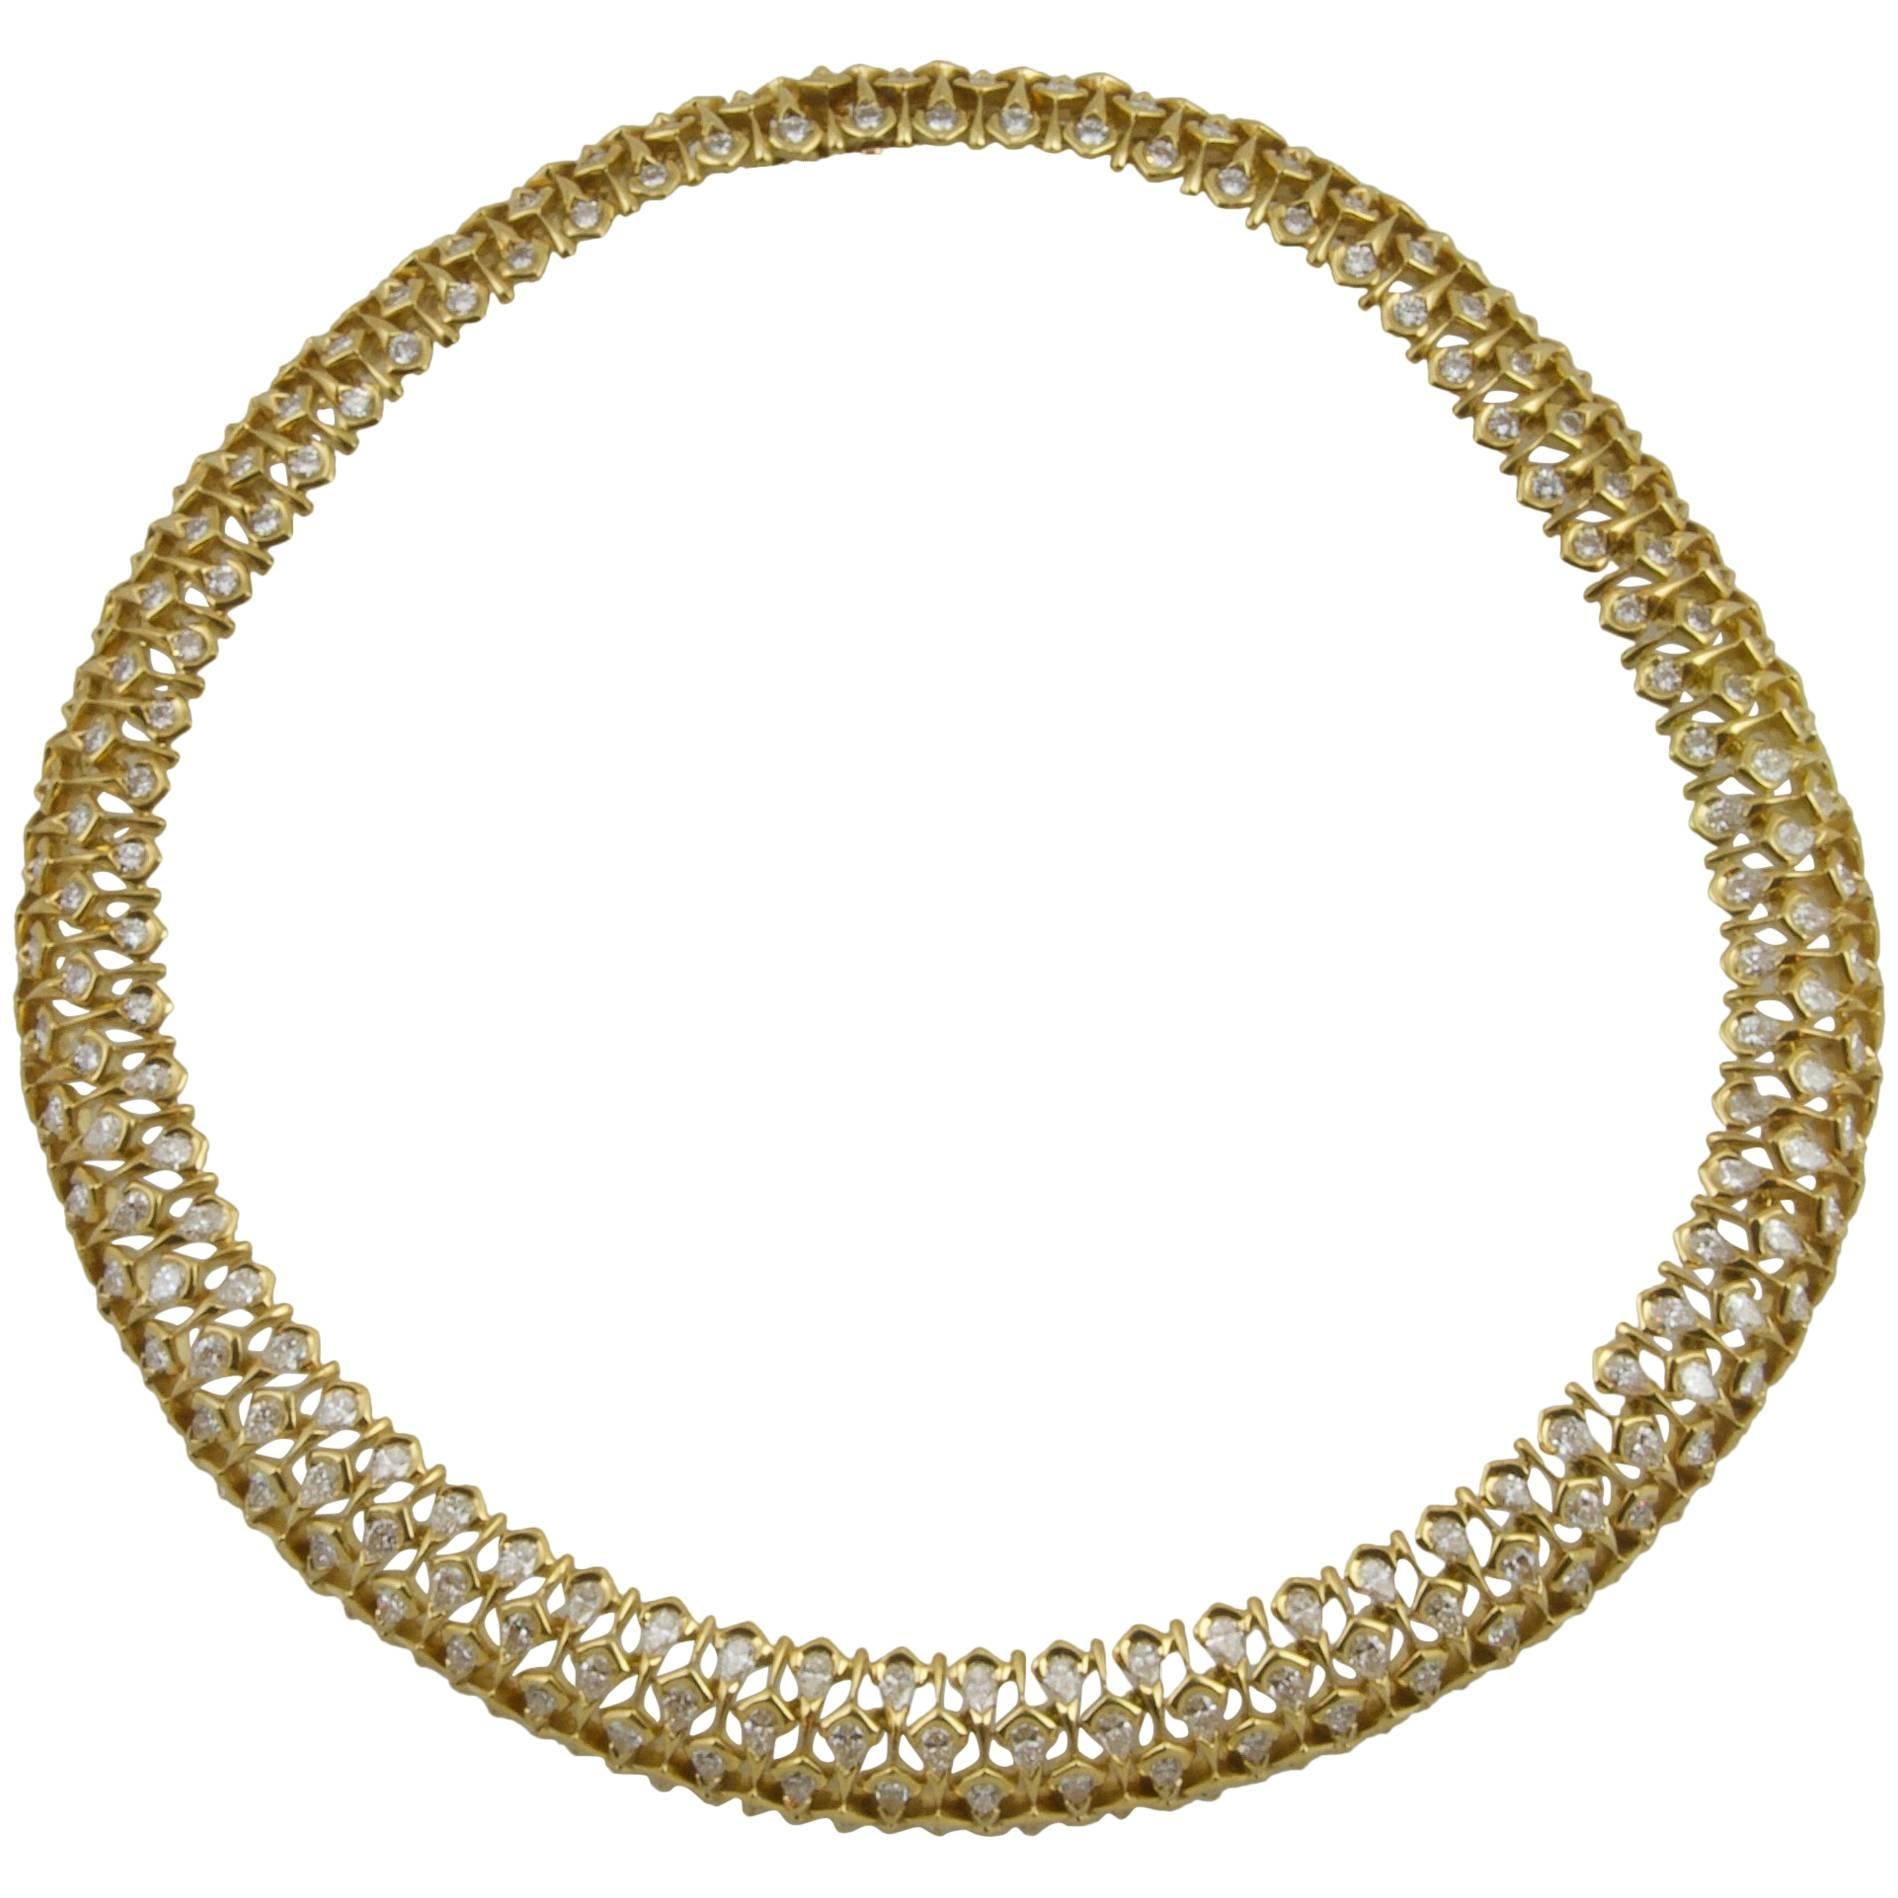 Vintage Yellow Gold Diamond Necklace by Mauboussin from Paris For Sale